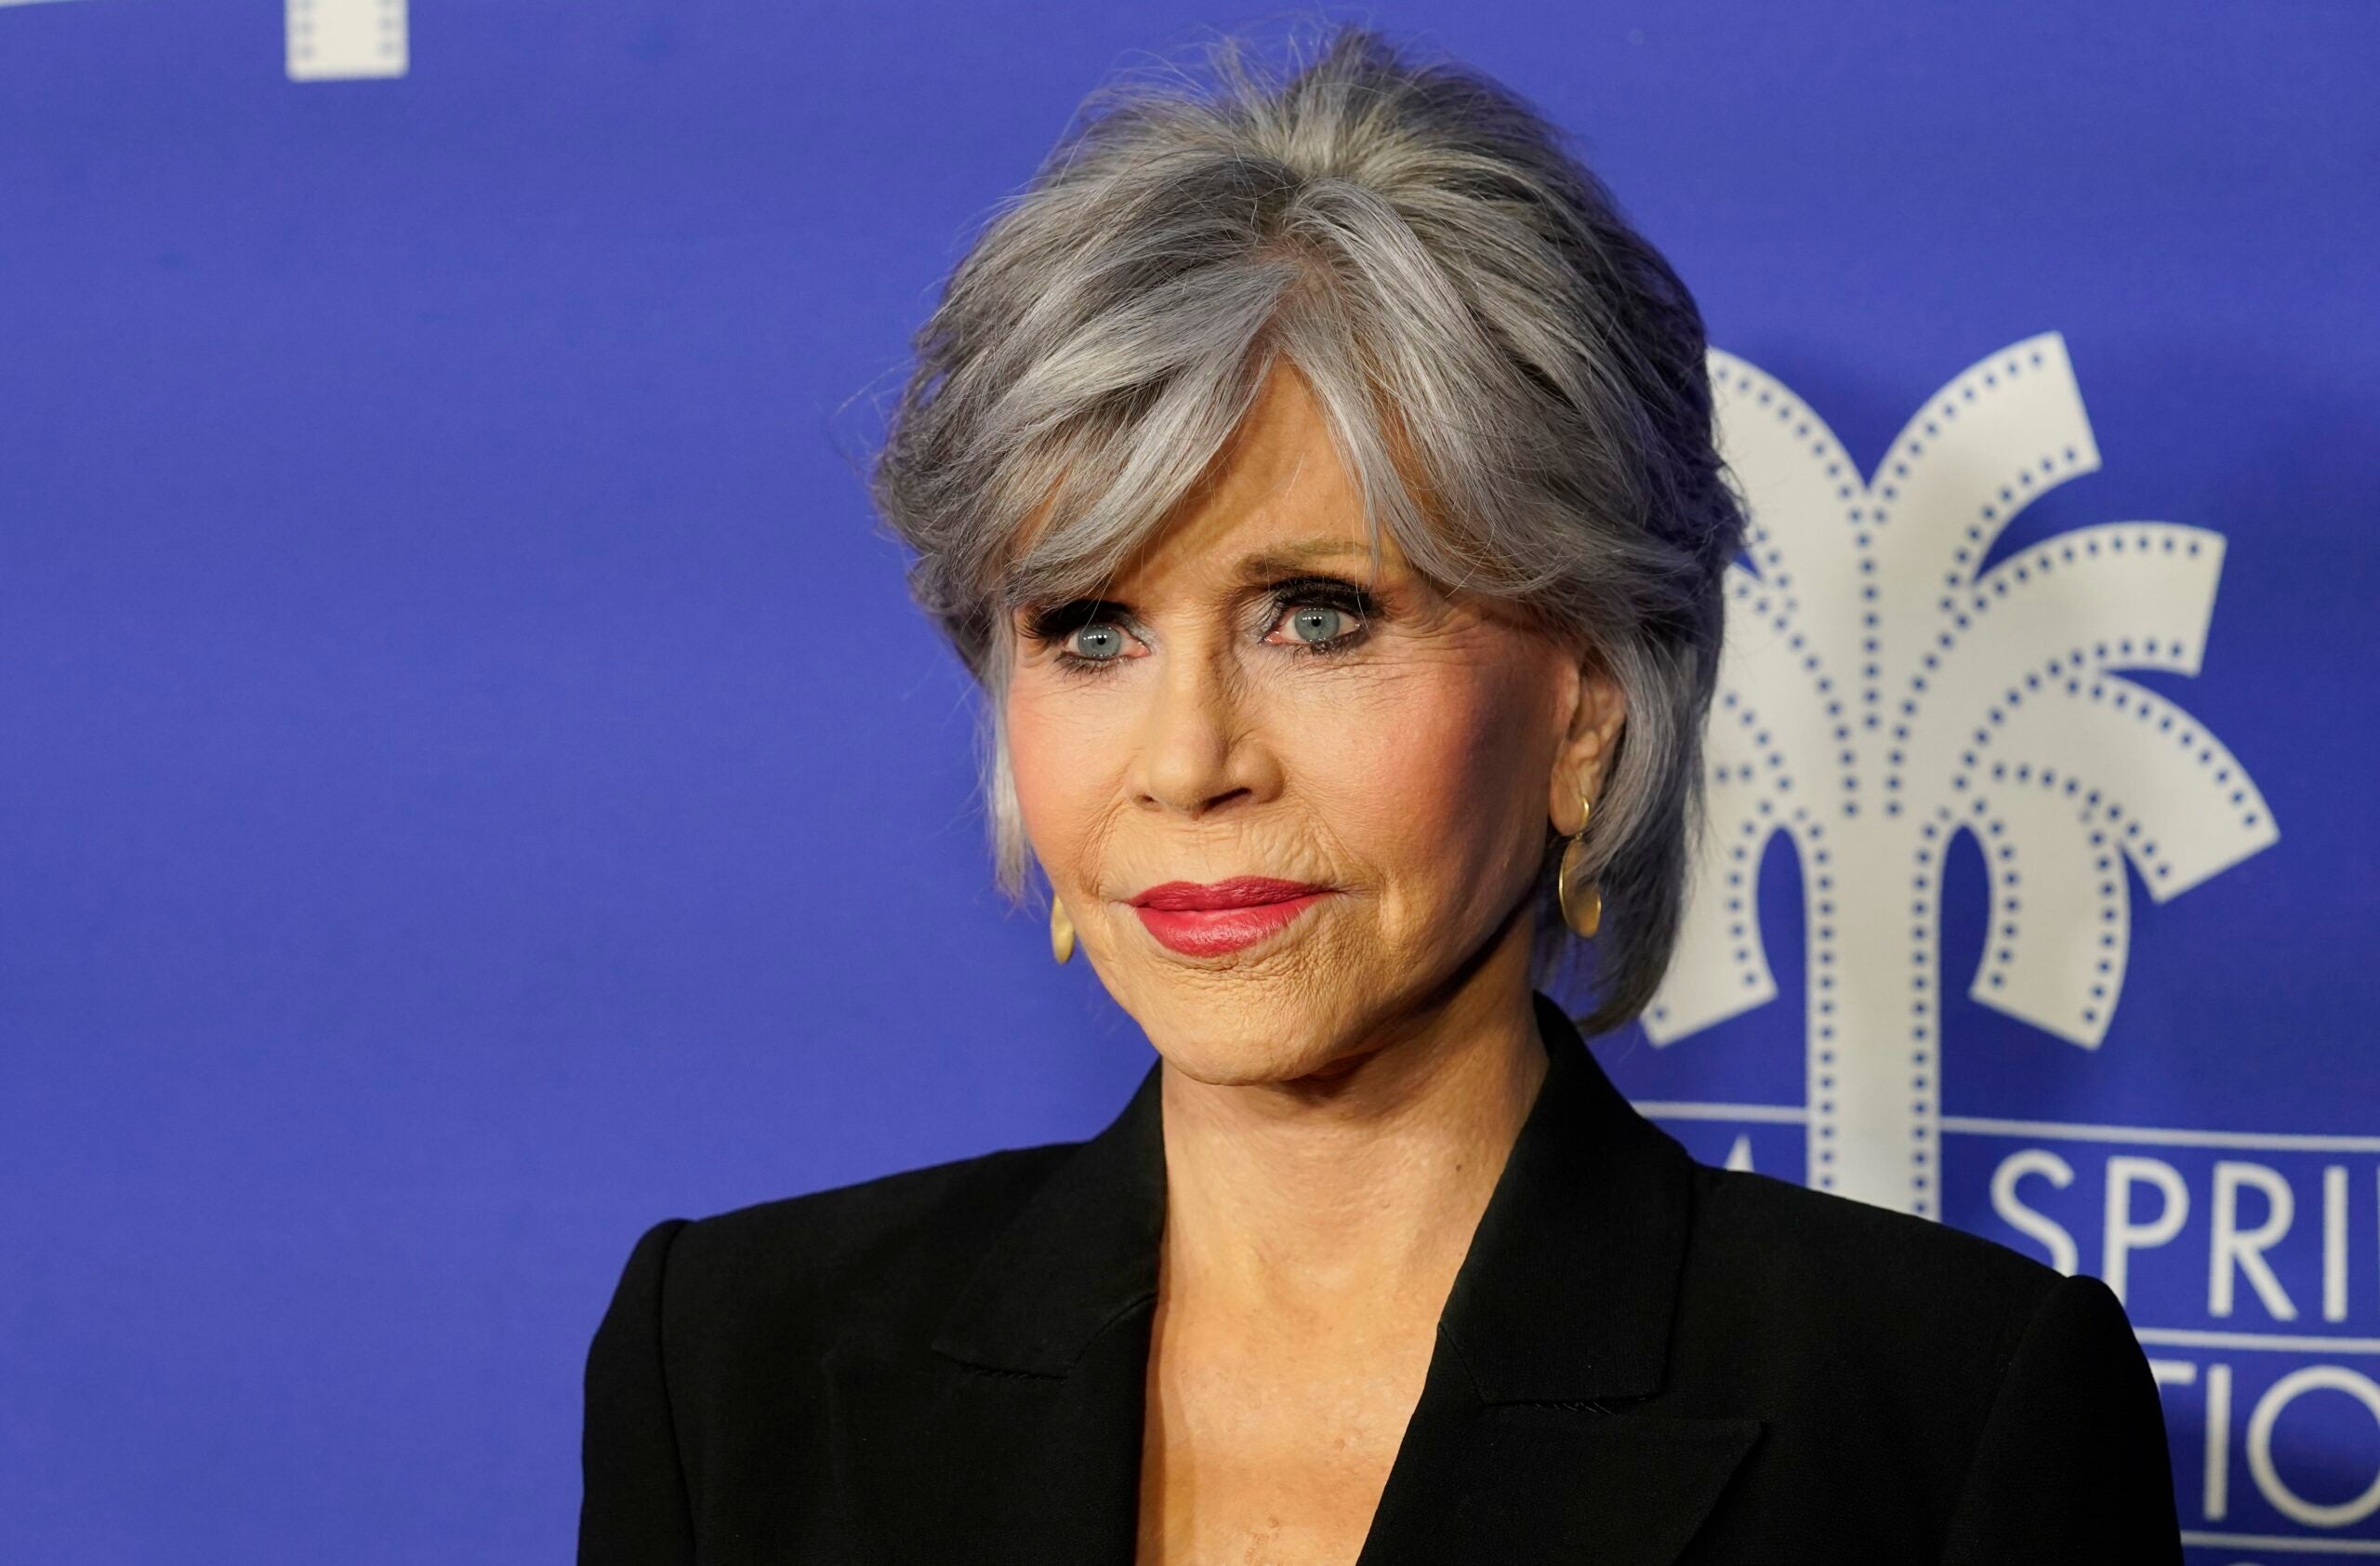 Jane Fonda, a cast member in "80 for Brady," poses at the premiere of the film at the Palm Springs International Film Festival.